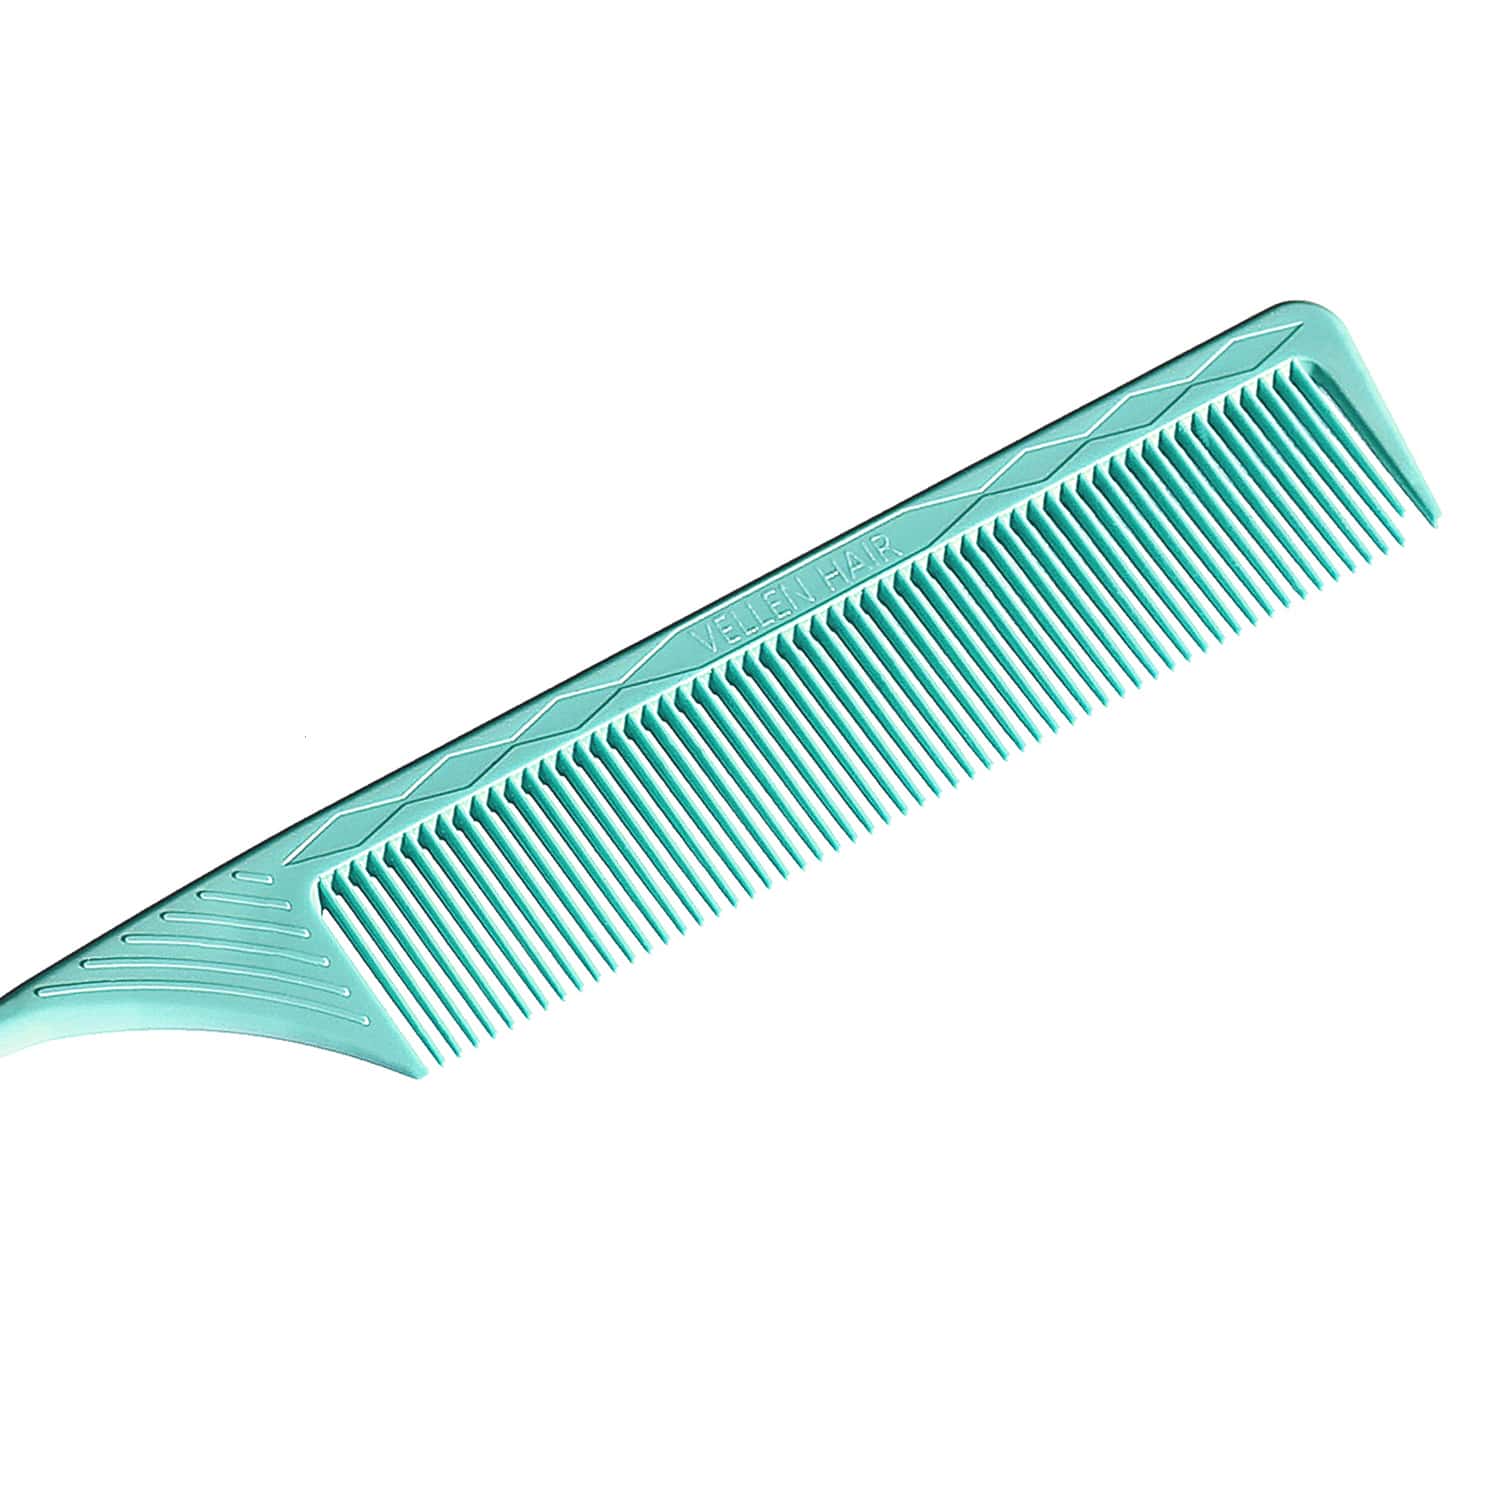 VELLEN HAIR® ULTIMATE PIN TAIL COMBS 3 PACK - MINT